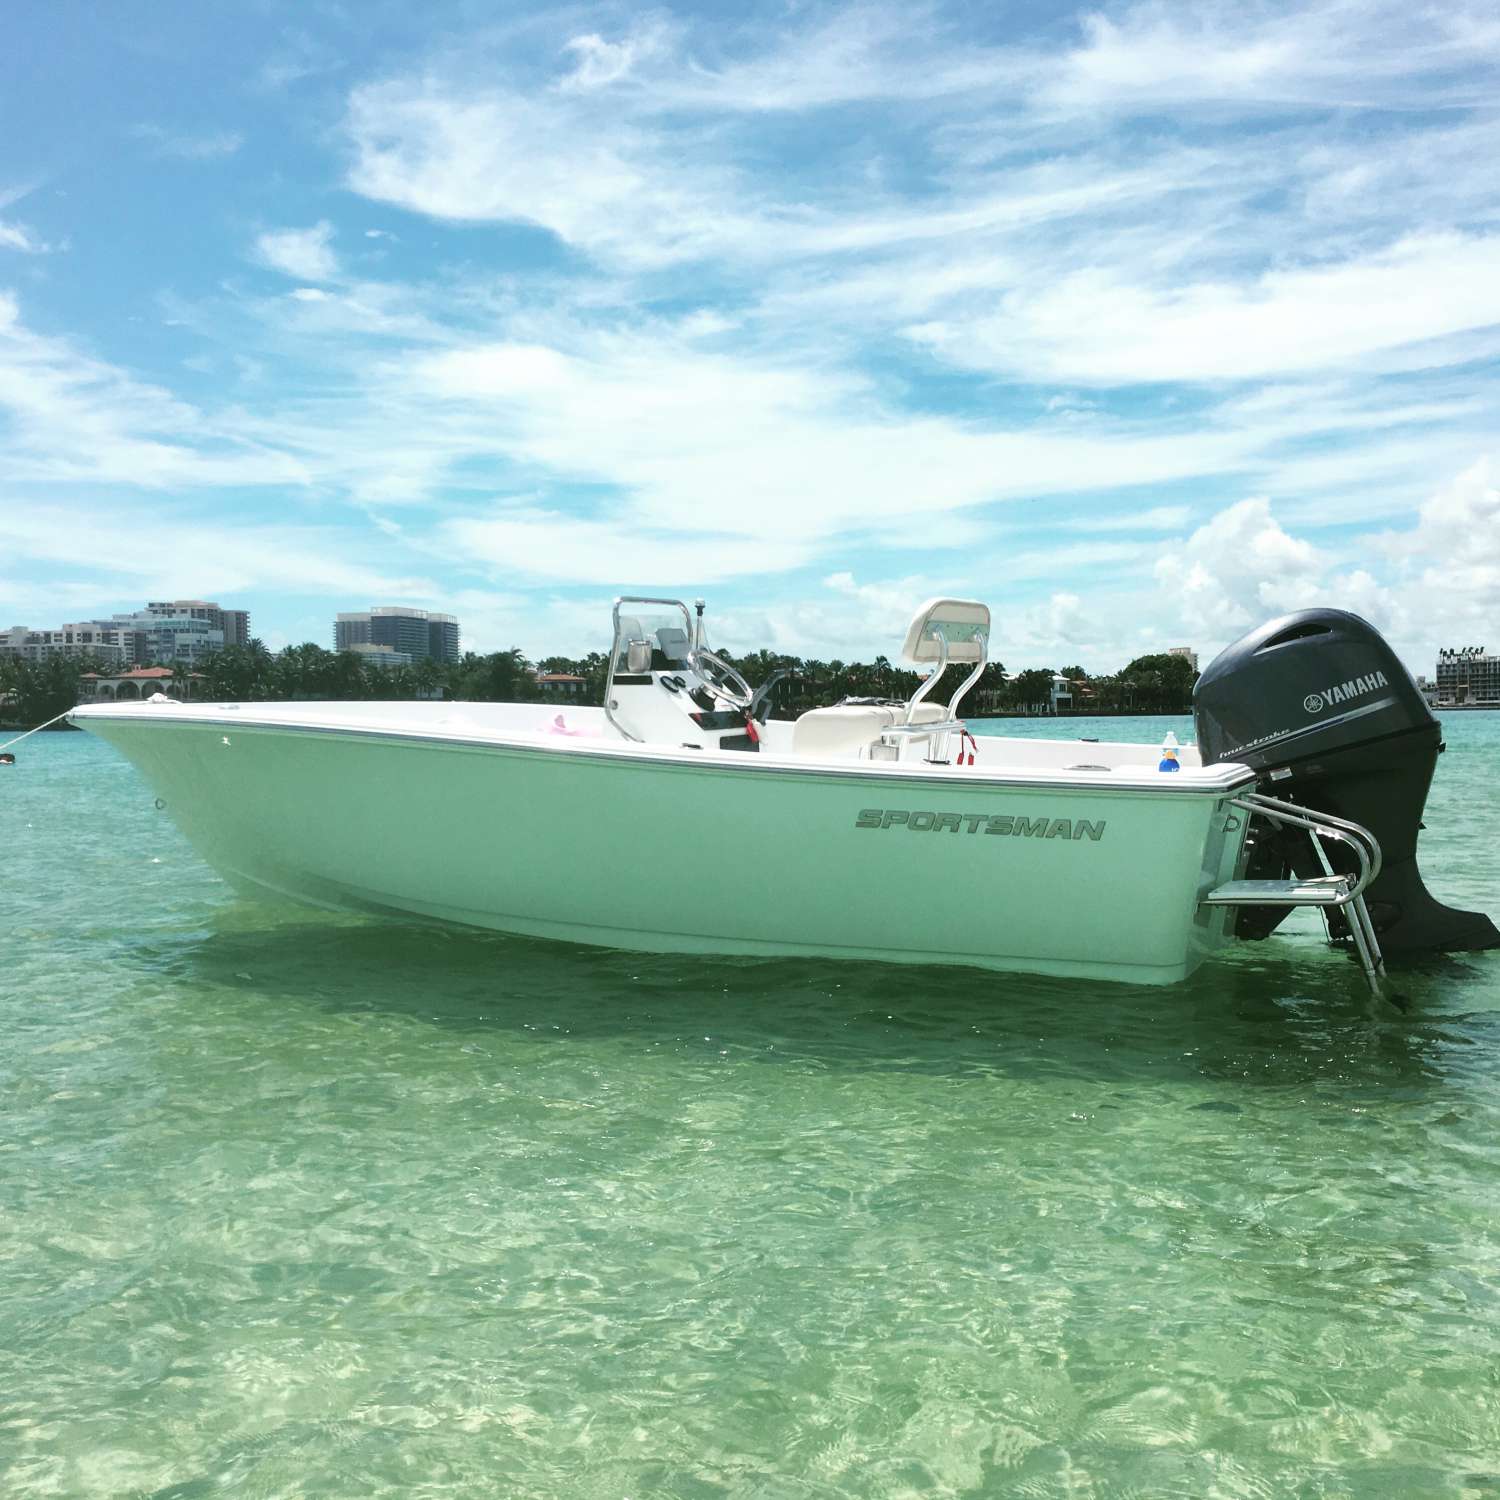 First day out in our 2017 19 Island Reef at Haulover Inlet